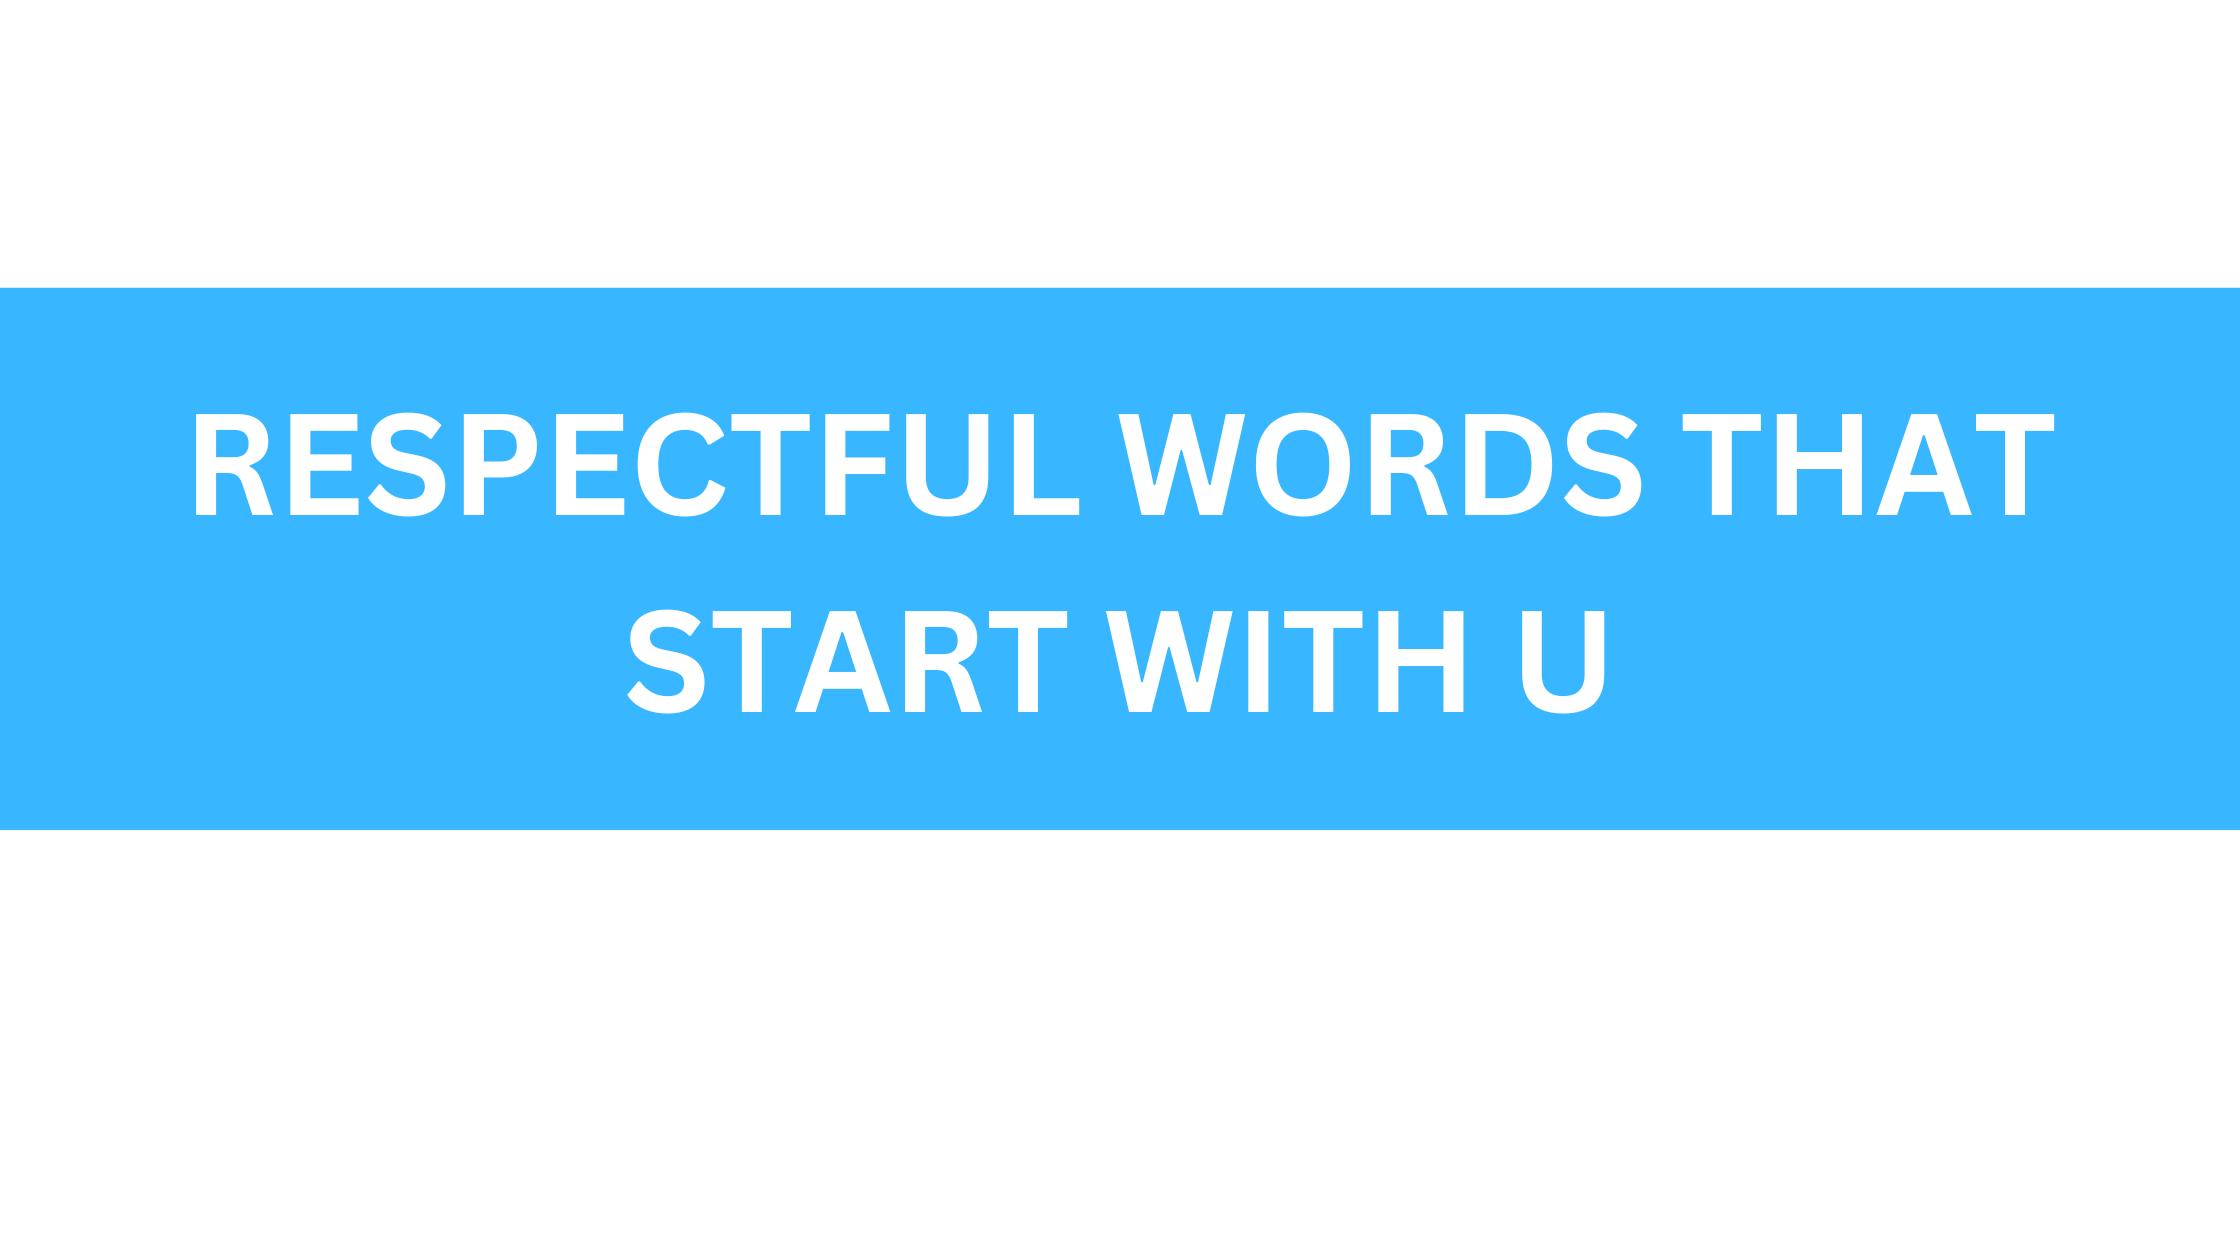 respectful words that start with u